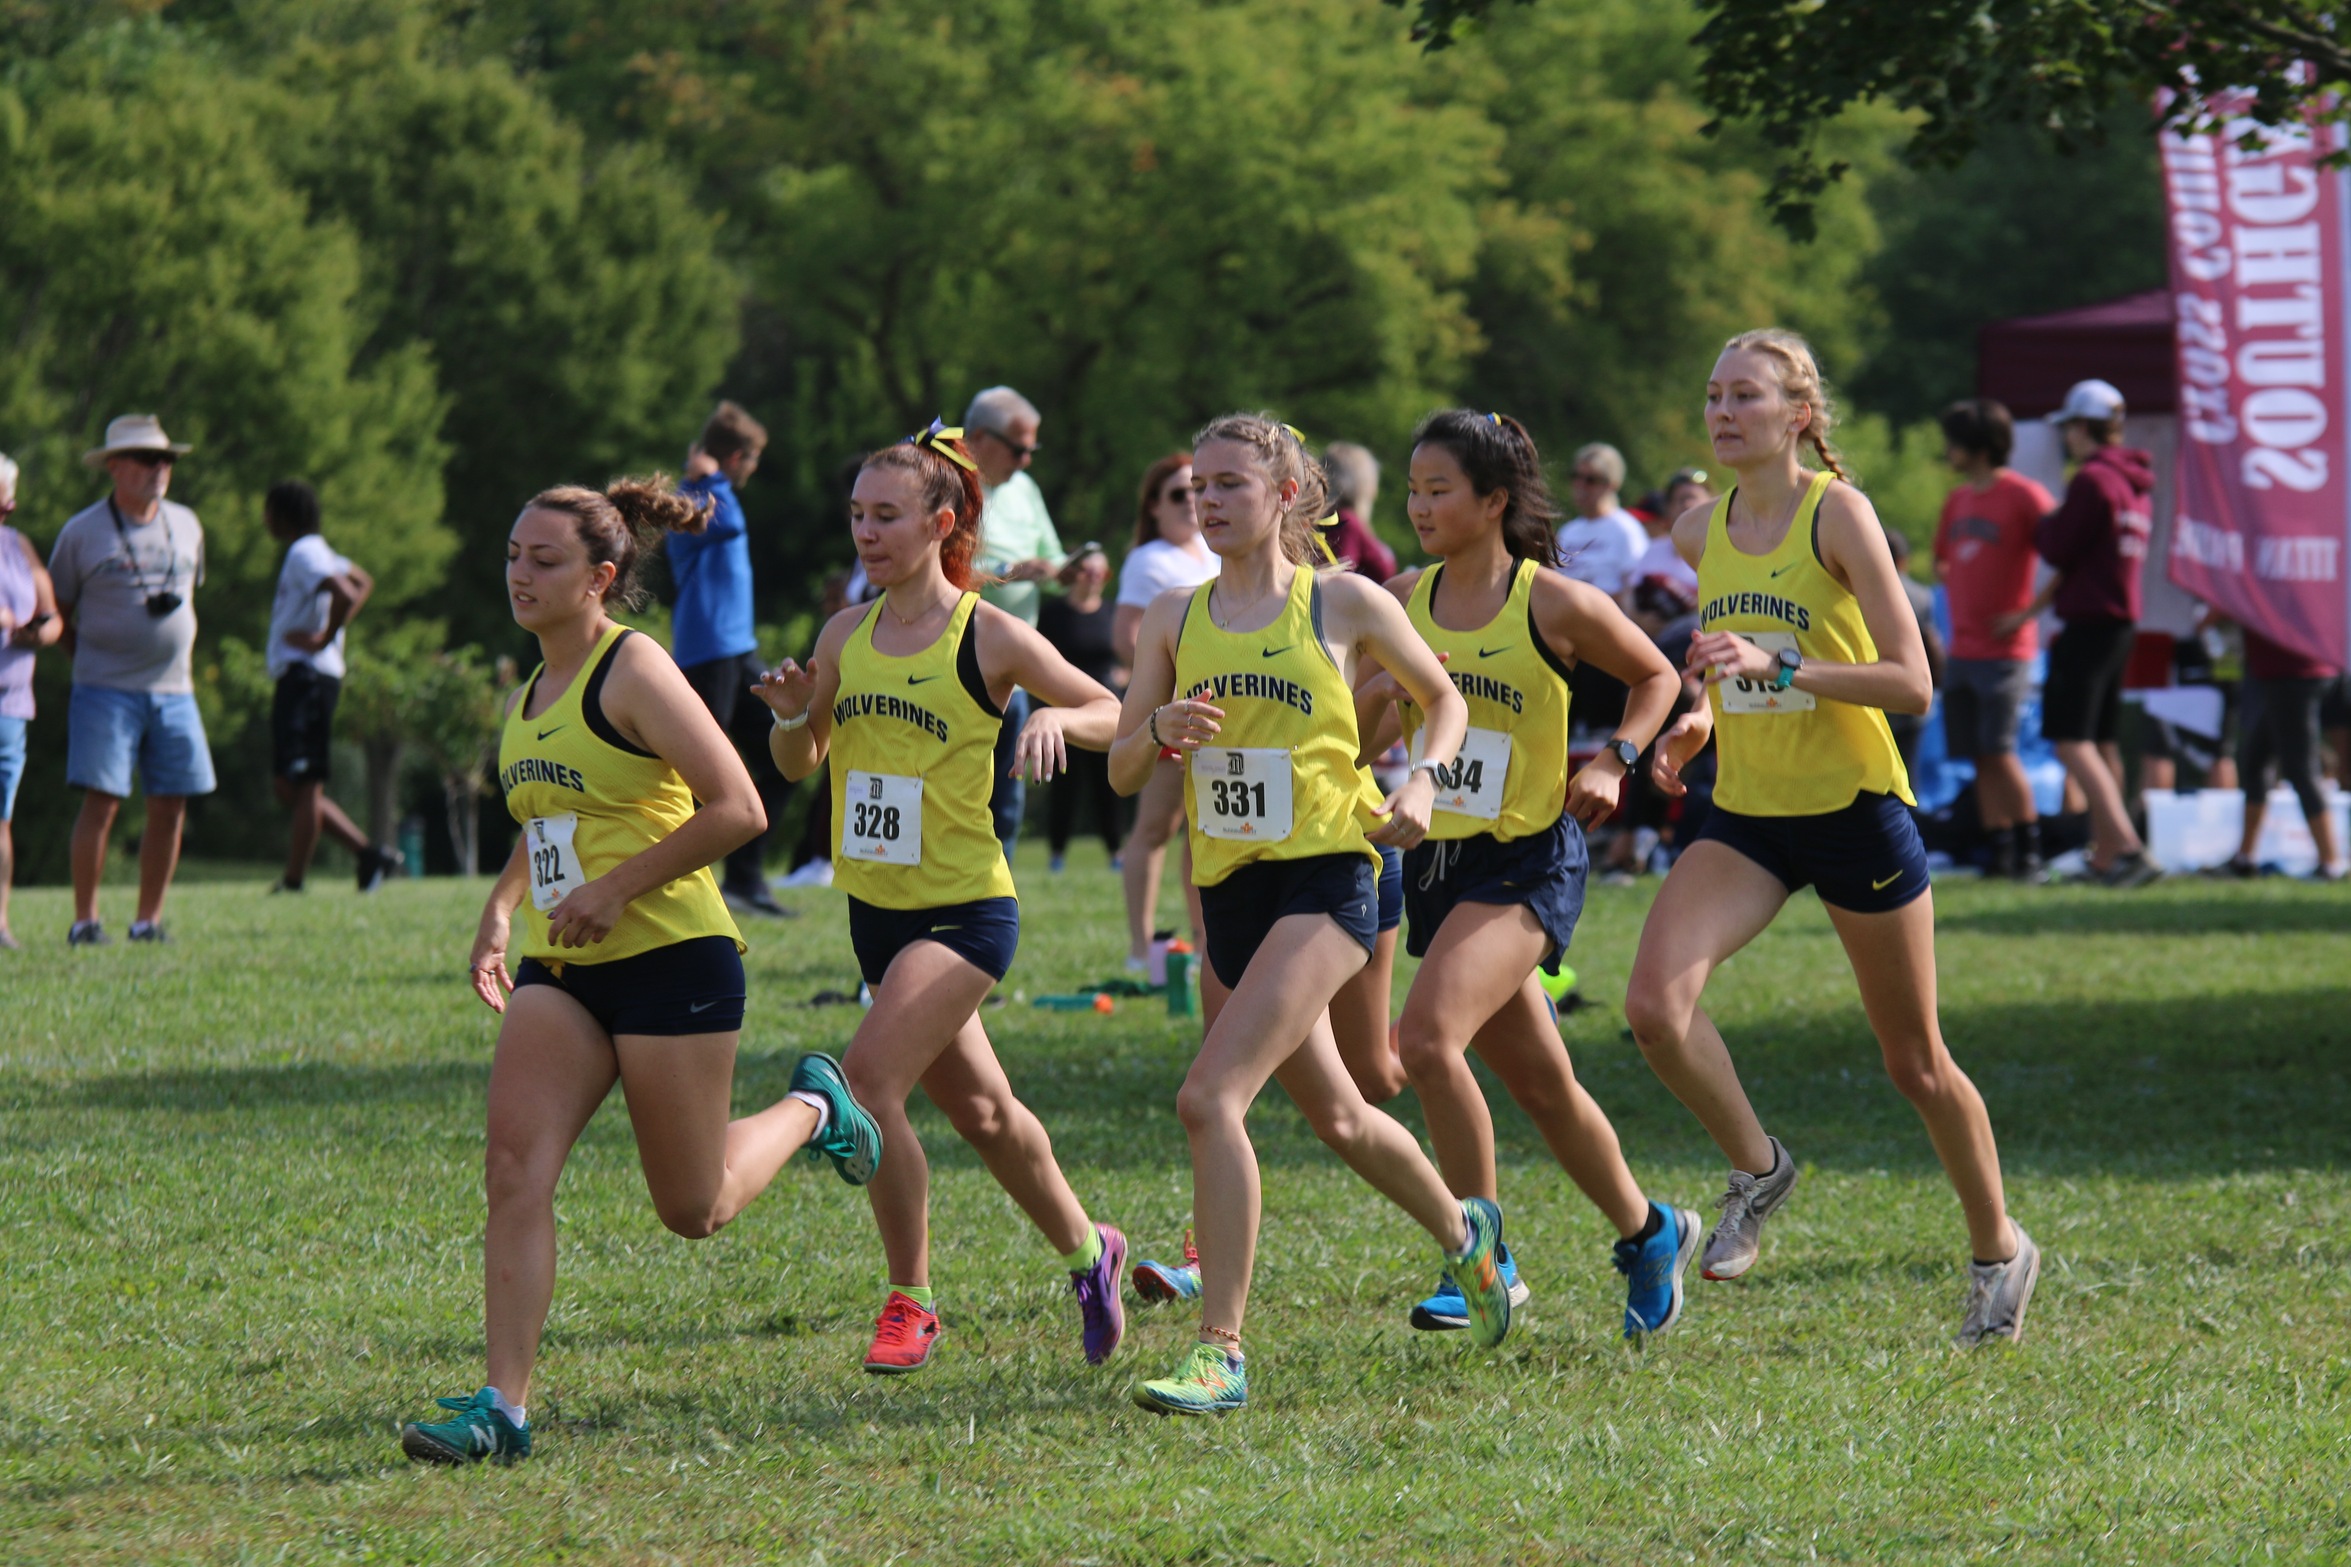 Wolverines harriers at the Detroit Mercy Titan Invitational Saturday at Cass Benton Park in Northville.